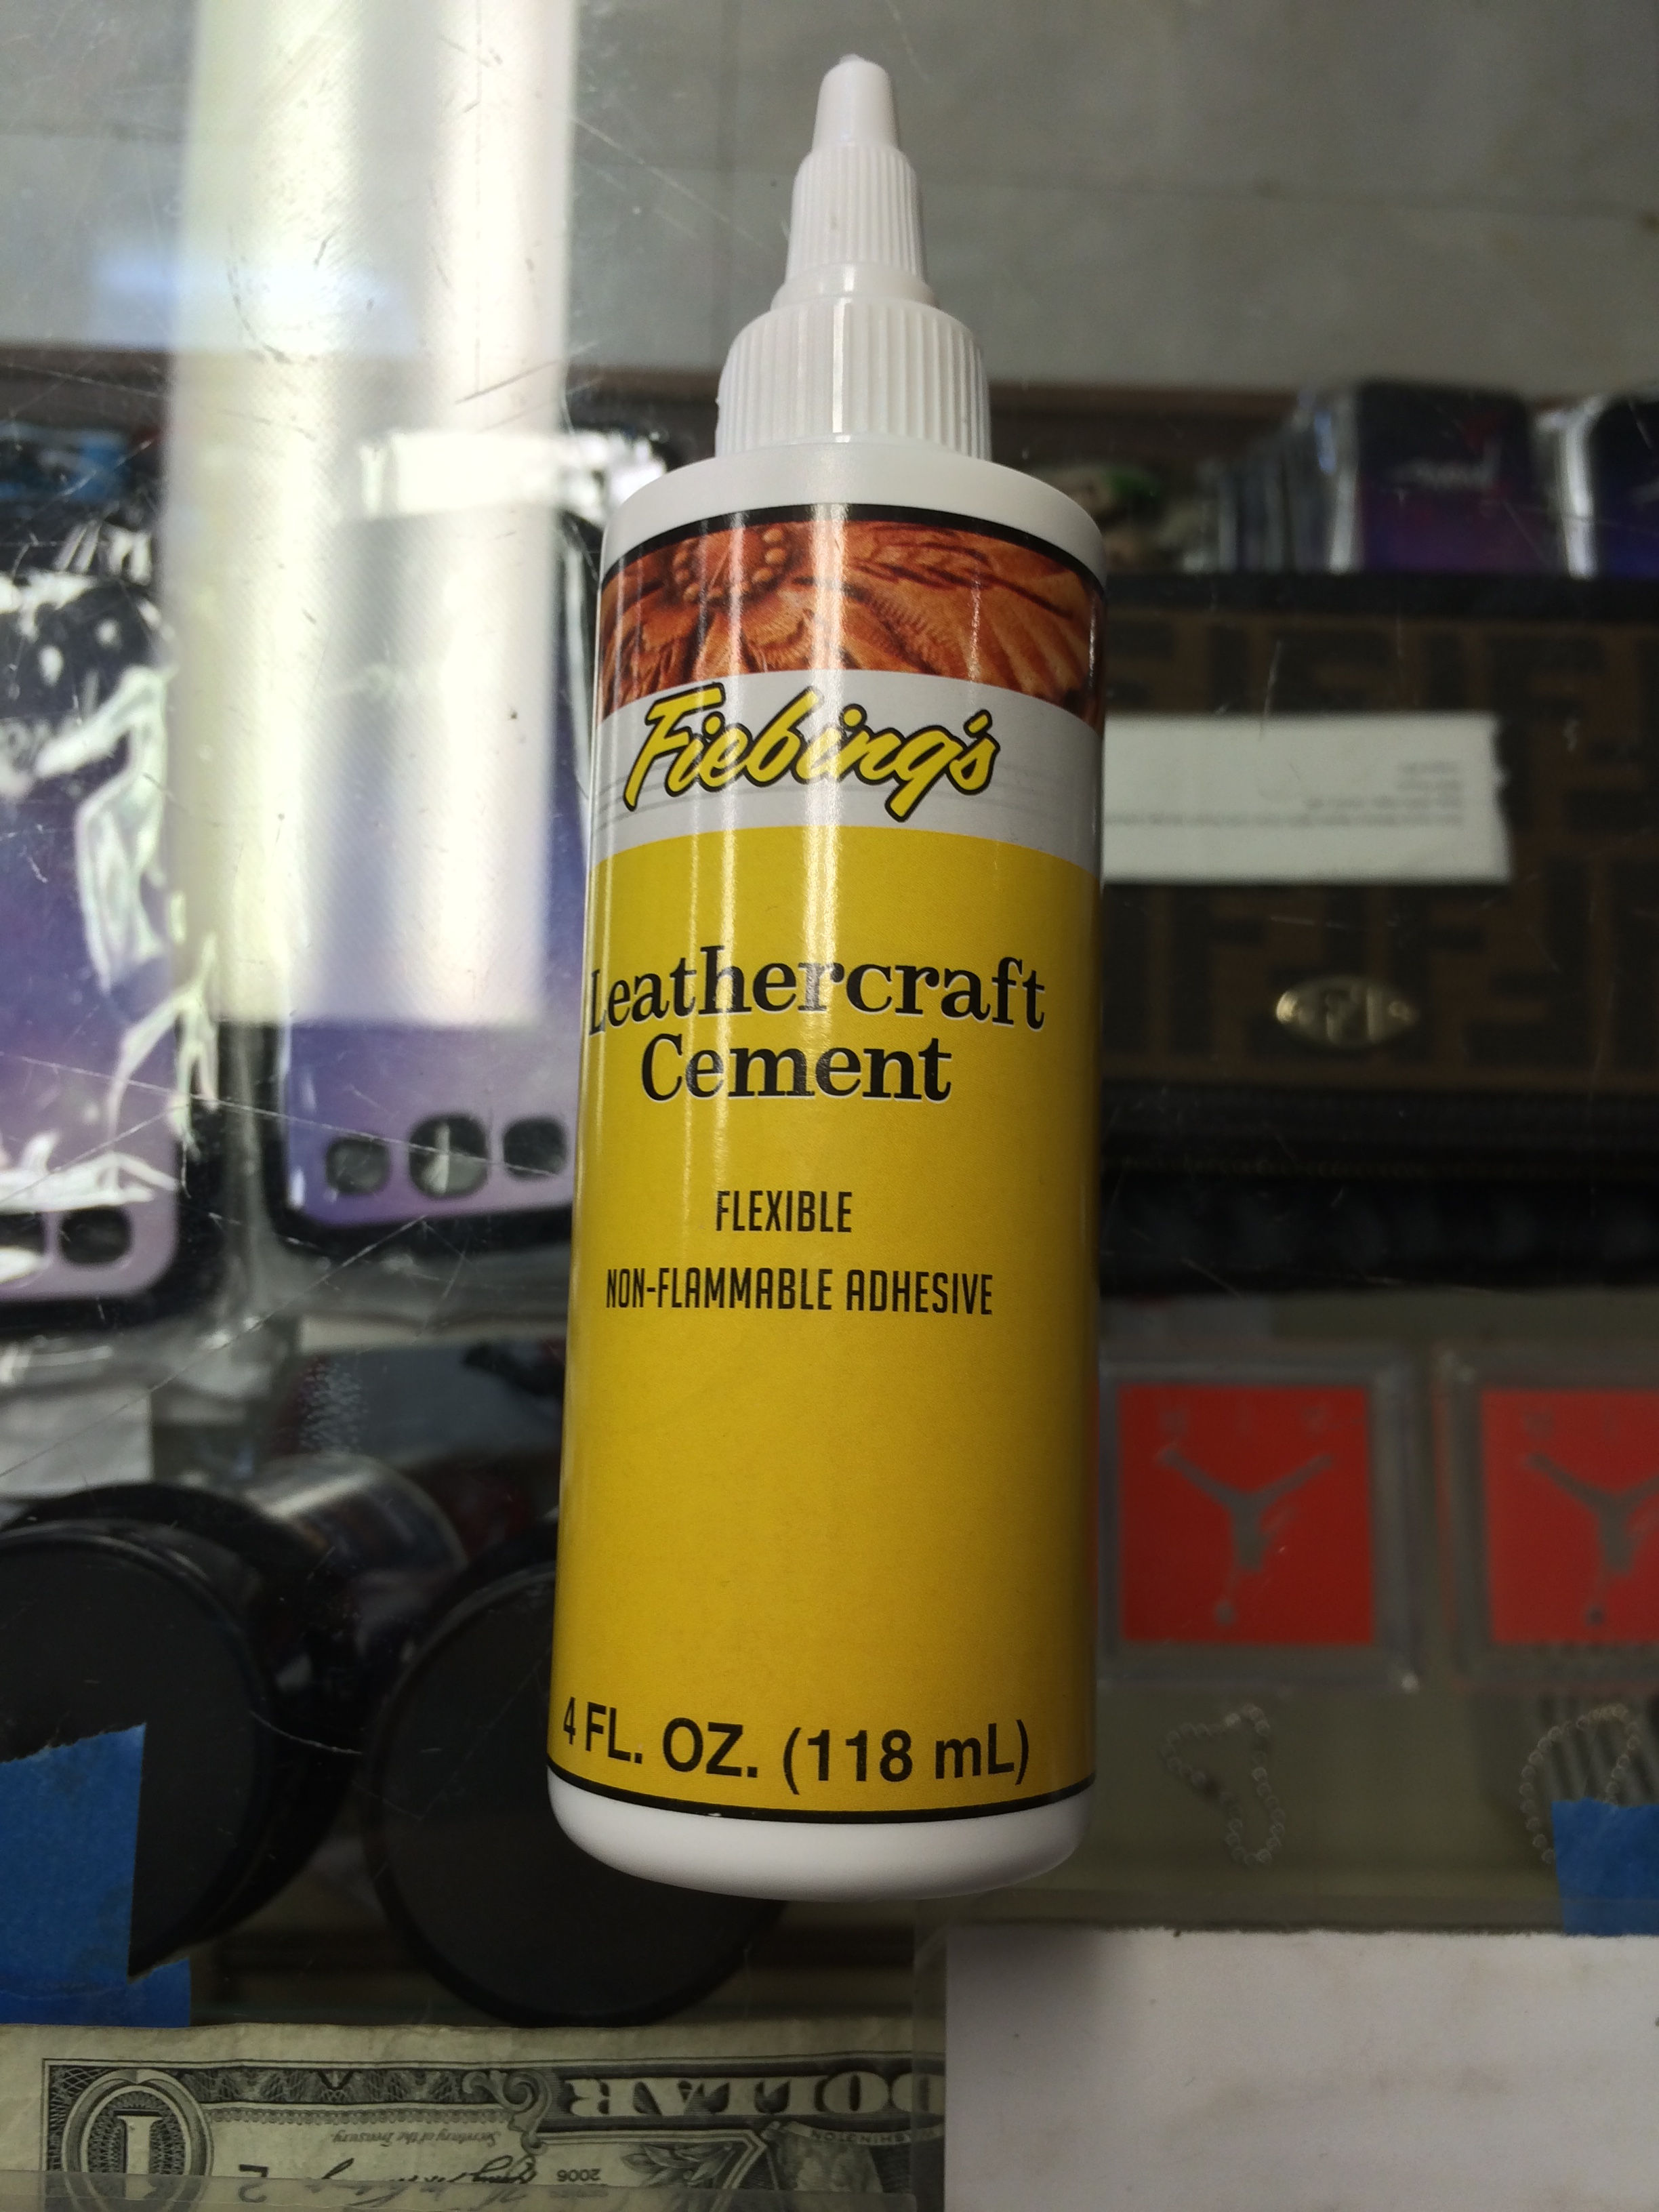 Fiebing’s Leather Craft Cement 4 FL OZ | Jwong Boutique